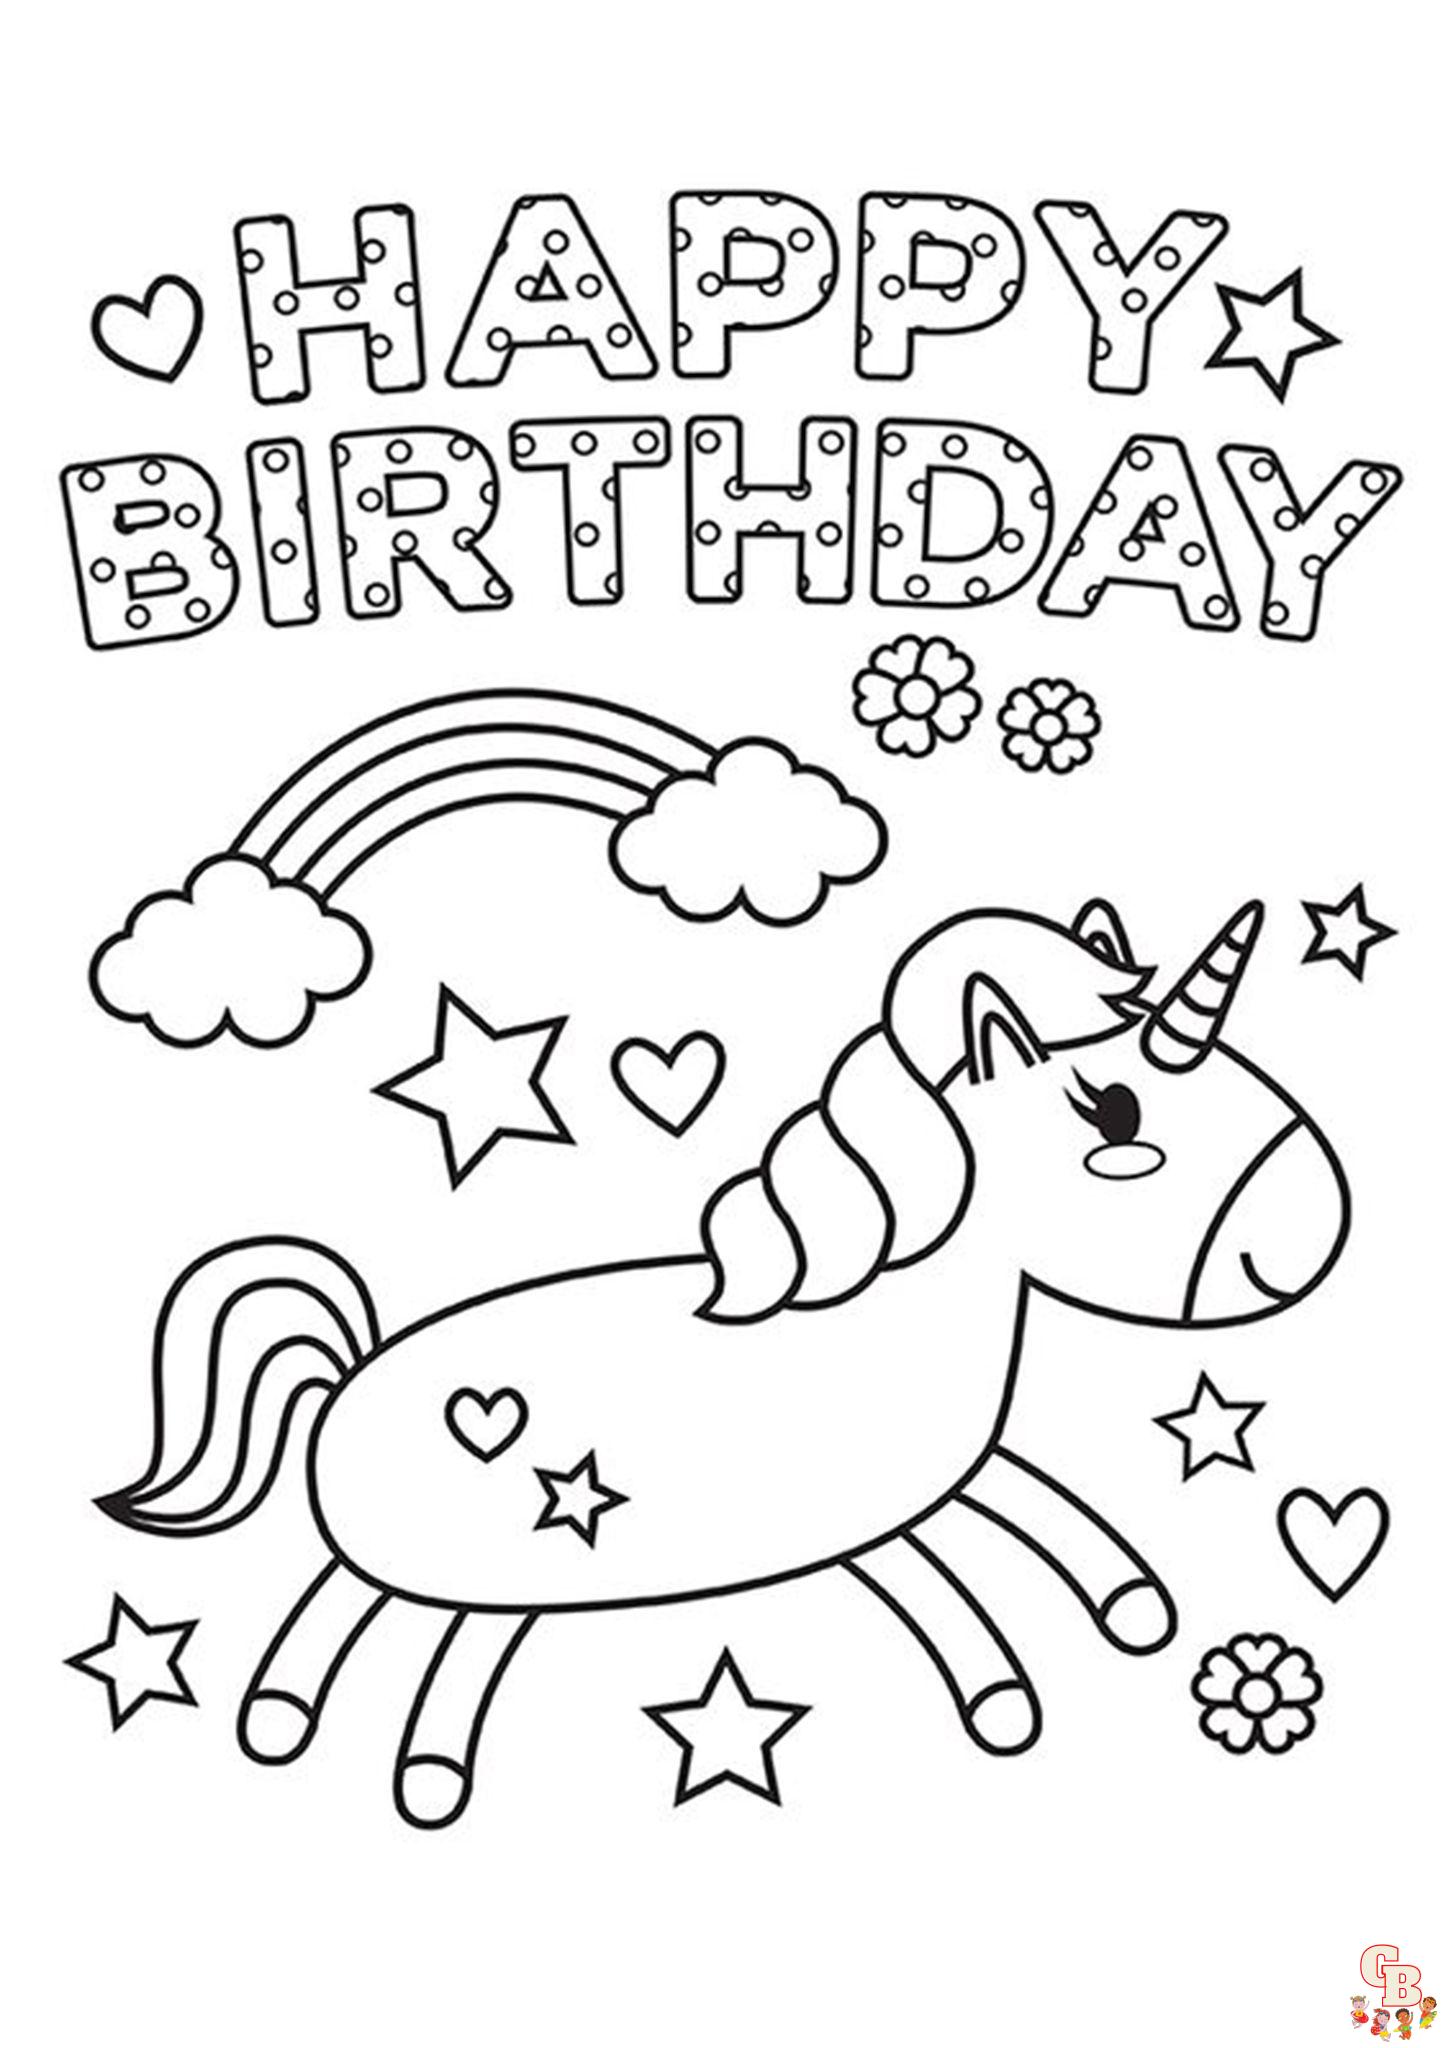 Cute Happy Birthday Coloring Pages - Printable and Free